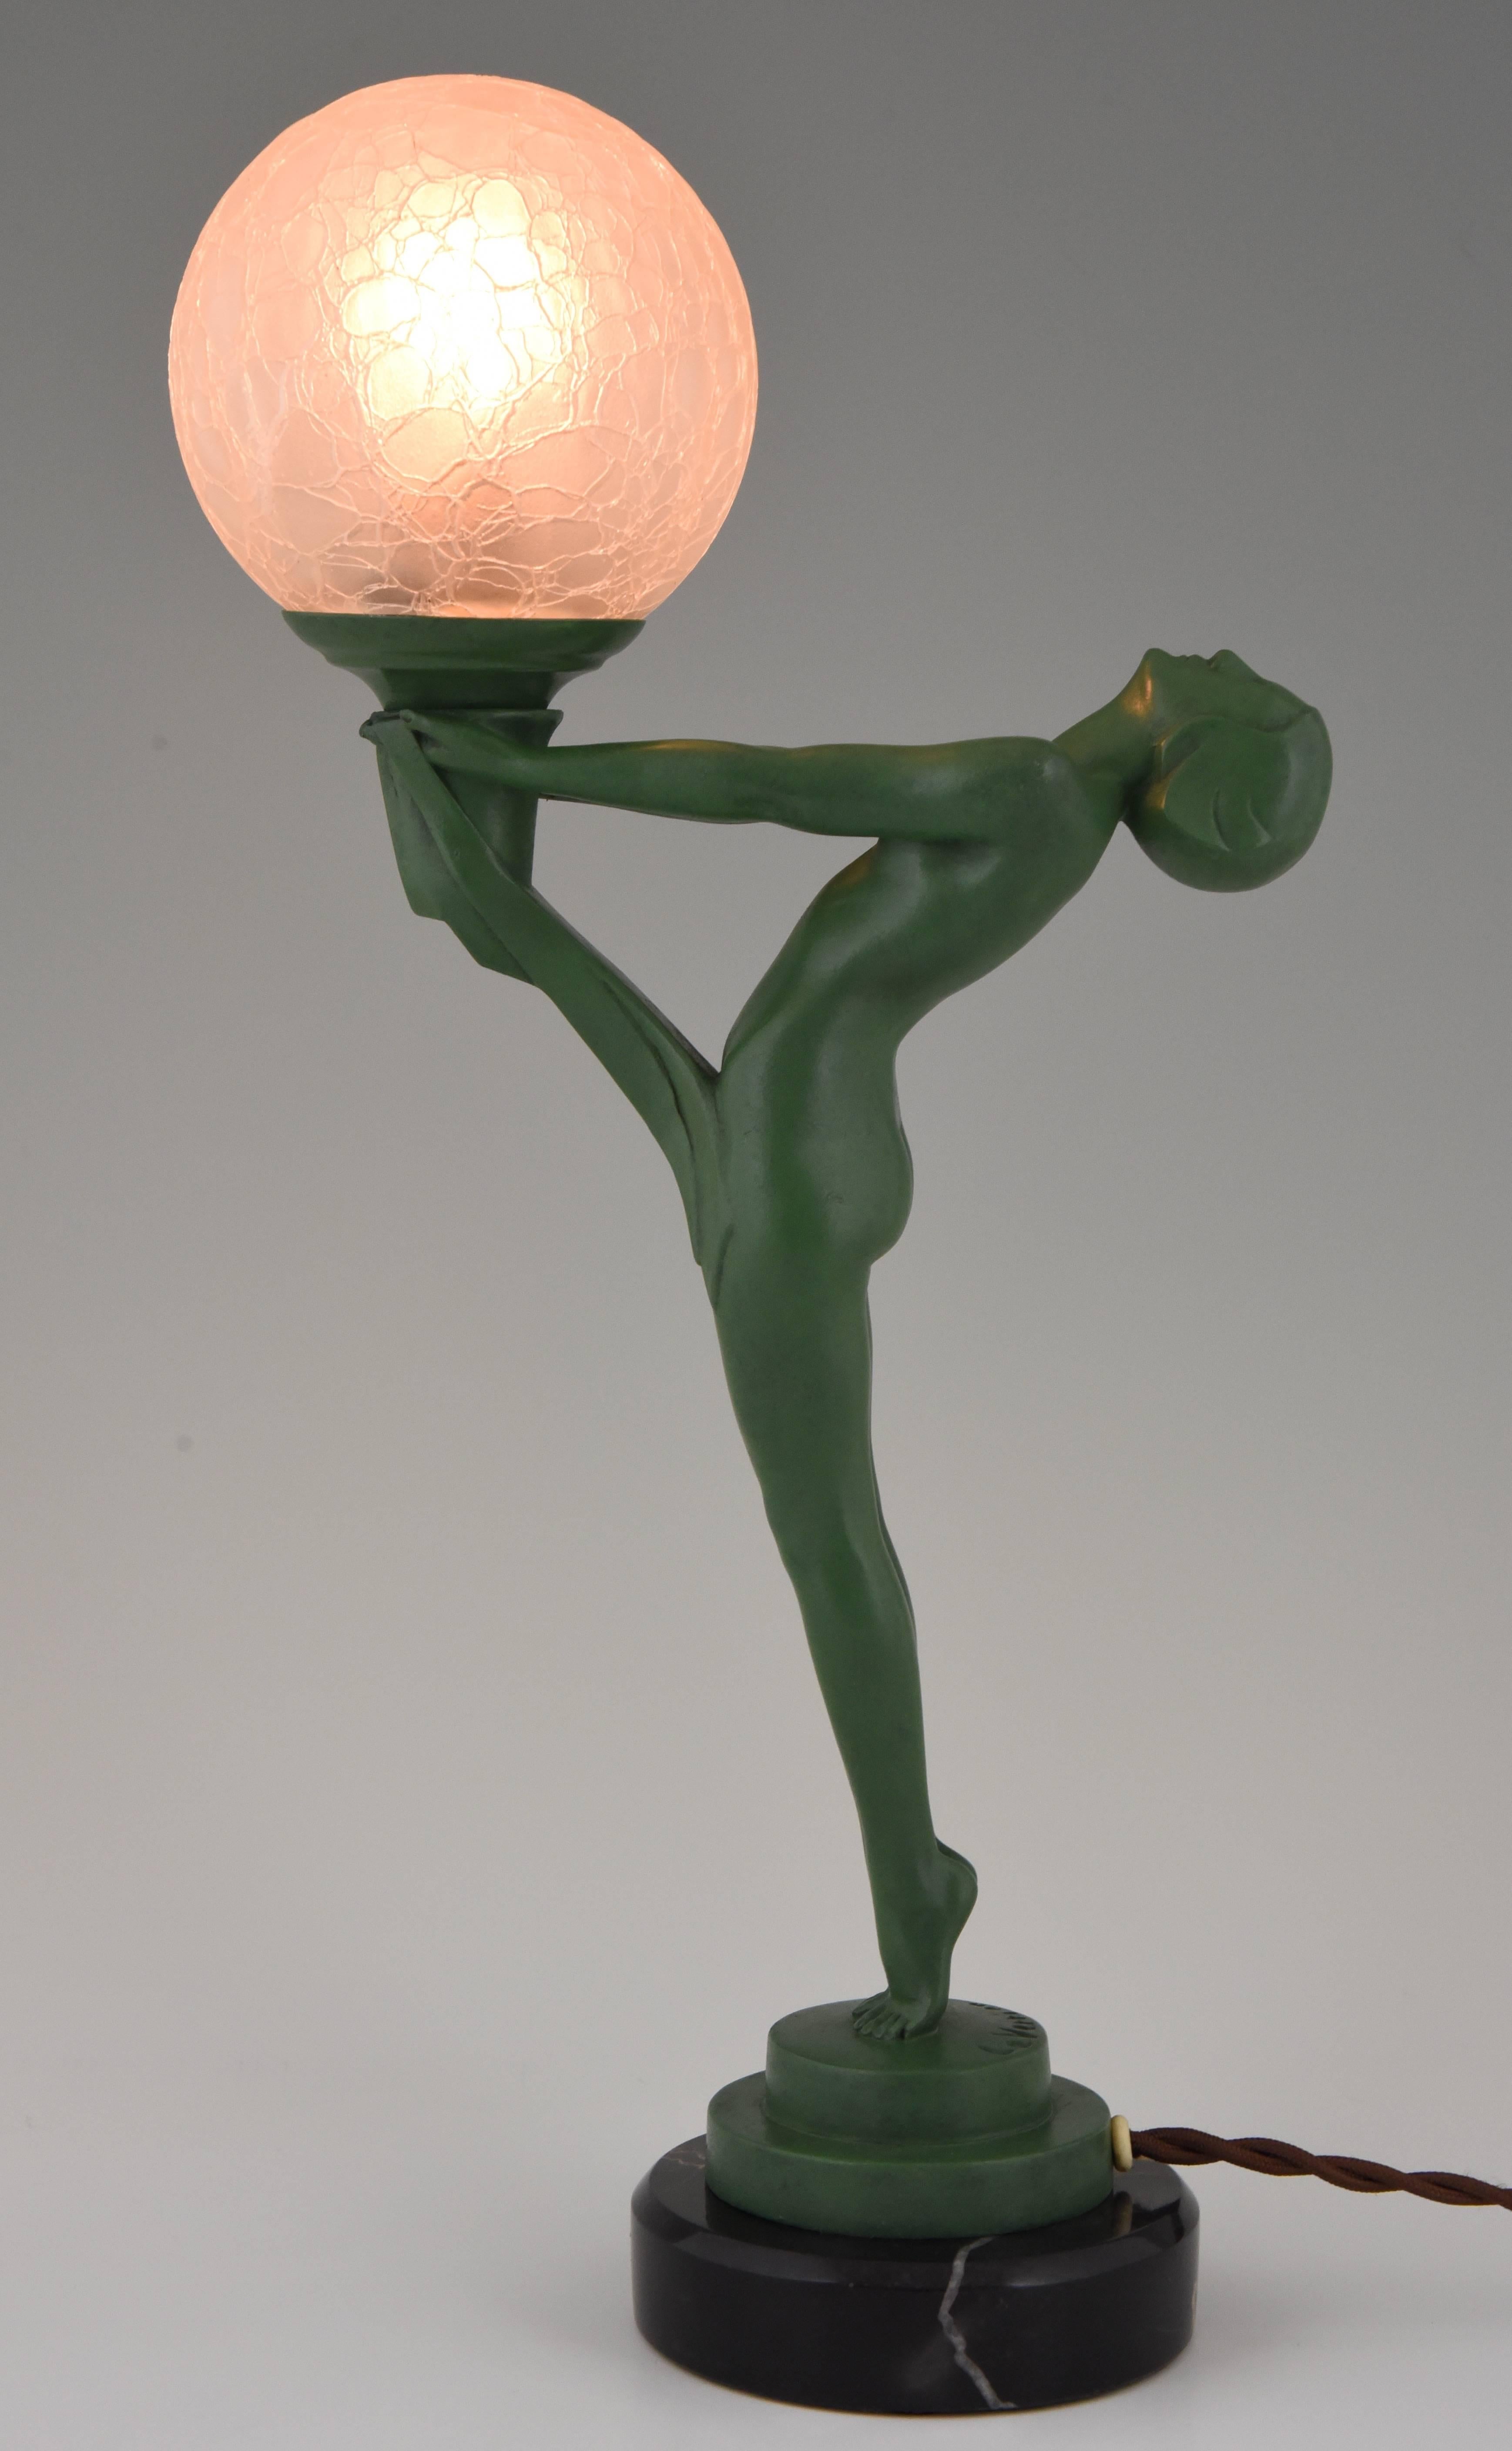 Art Deco figural table lamp with standing nude.
Max Le Verrier

Signature/ Marks: Le Verrier
Style: Art Deco
Date: 1930
Material: Green patinated metal. Marble base. Crackled glass shade.
Origin: France
Size: H. 40 cm. x L. 19.5 cm. x W. 10